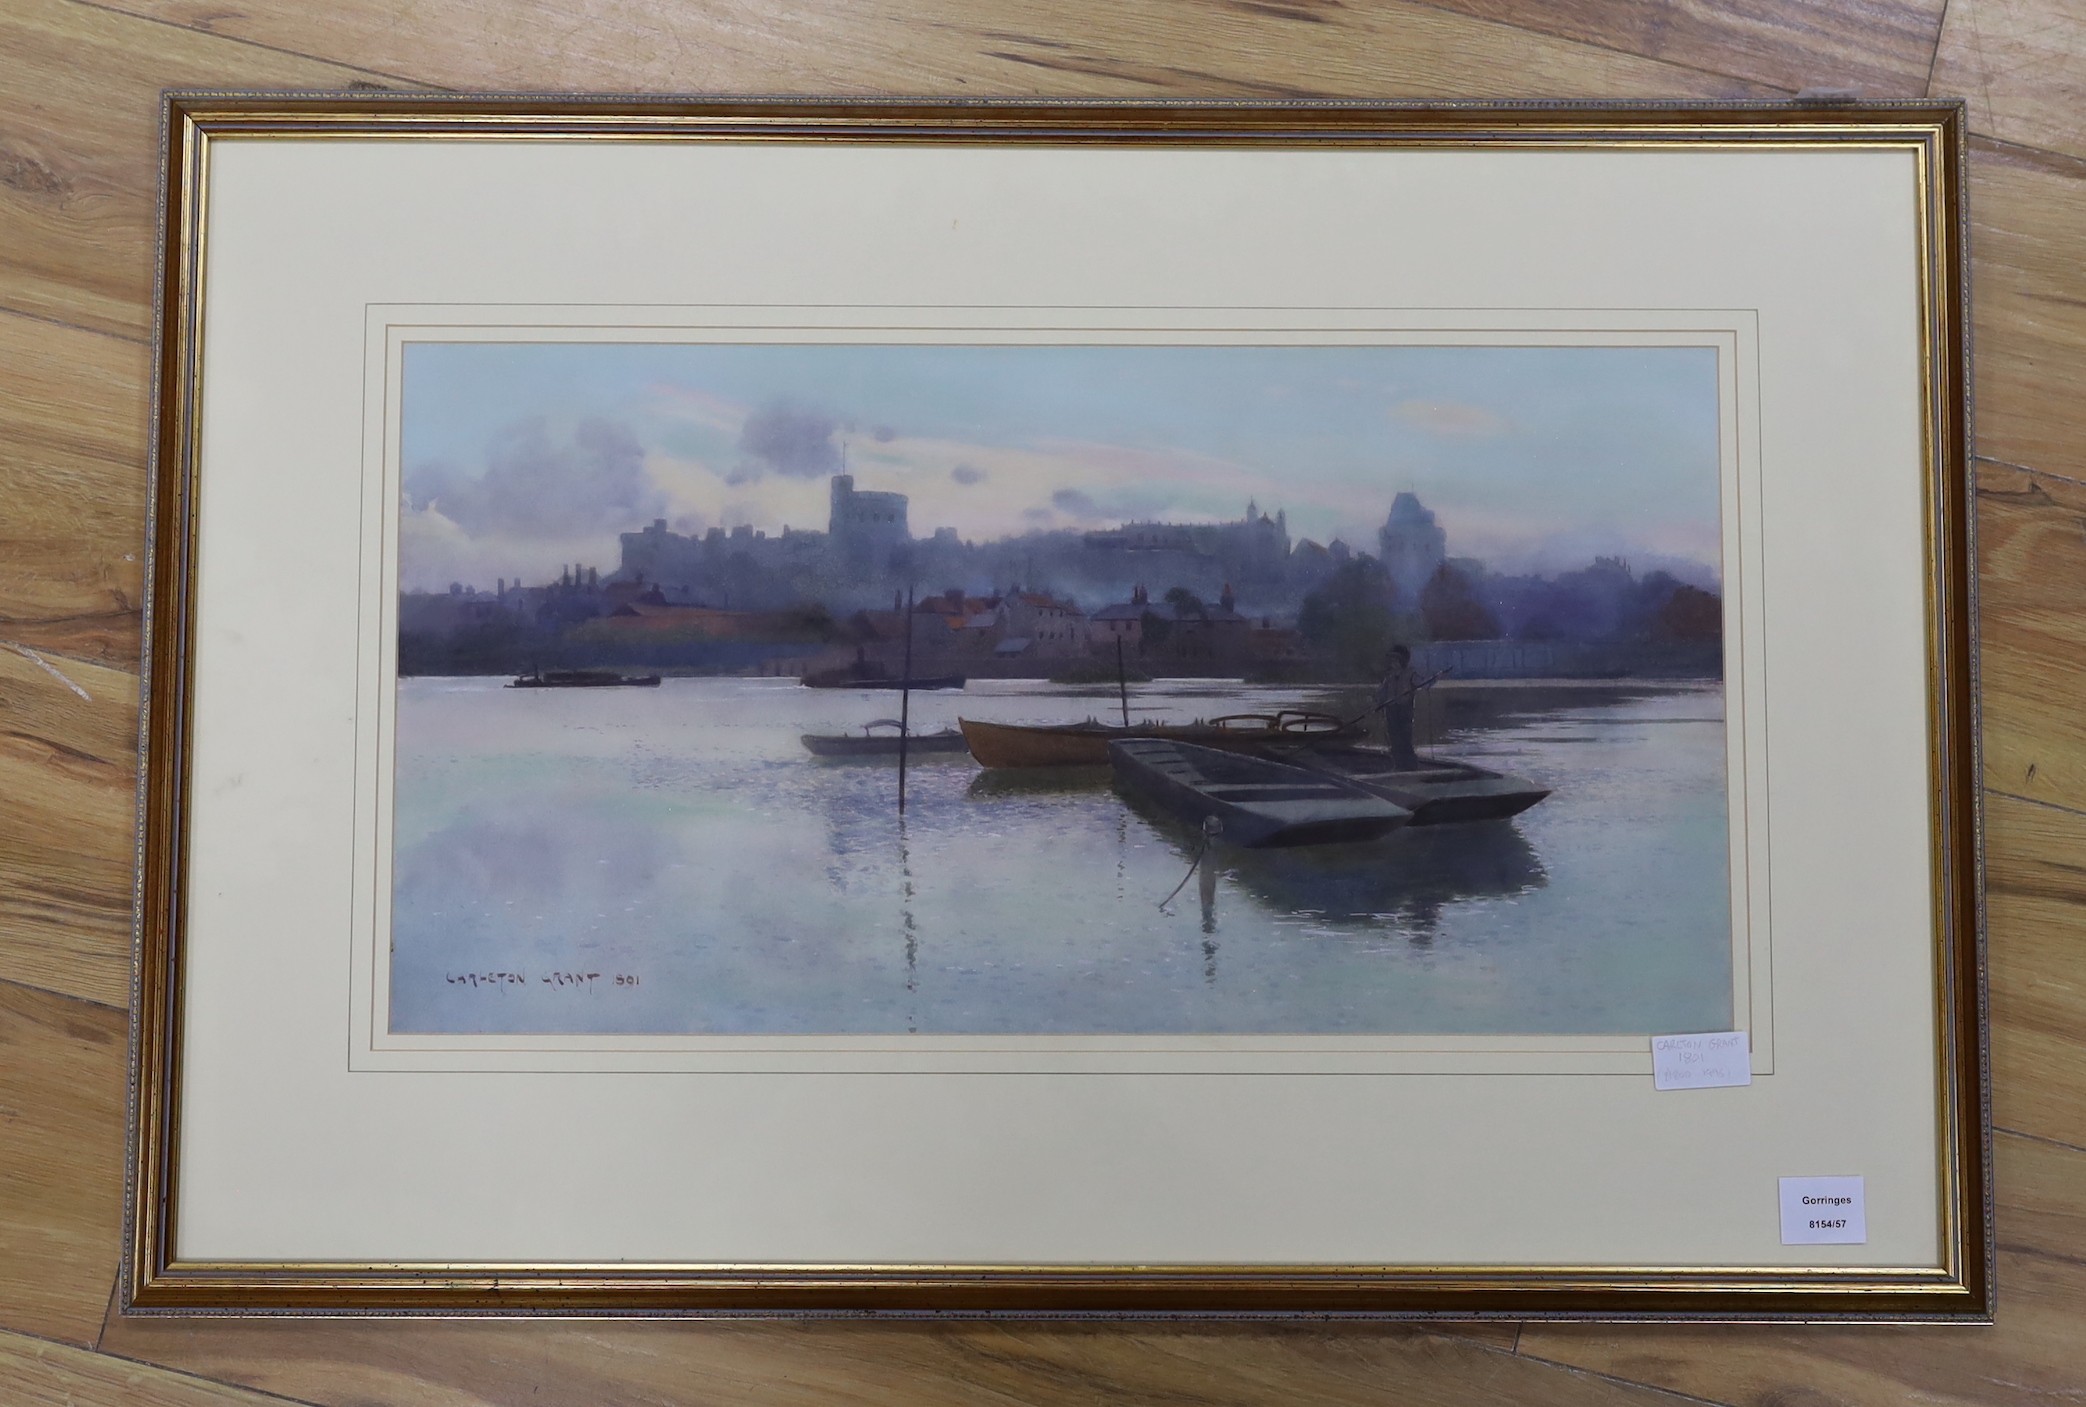 Carleton Grant (1860-1930), gouache and watercolour, Study of Windsor Castle from the waterside, signed and dated 1891, 34 x 64cm